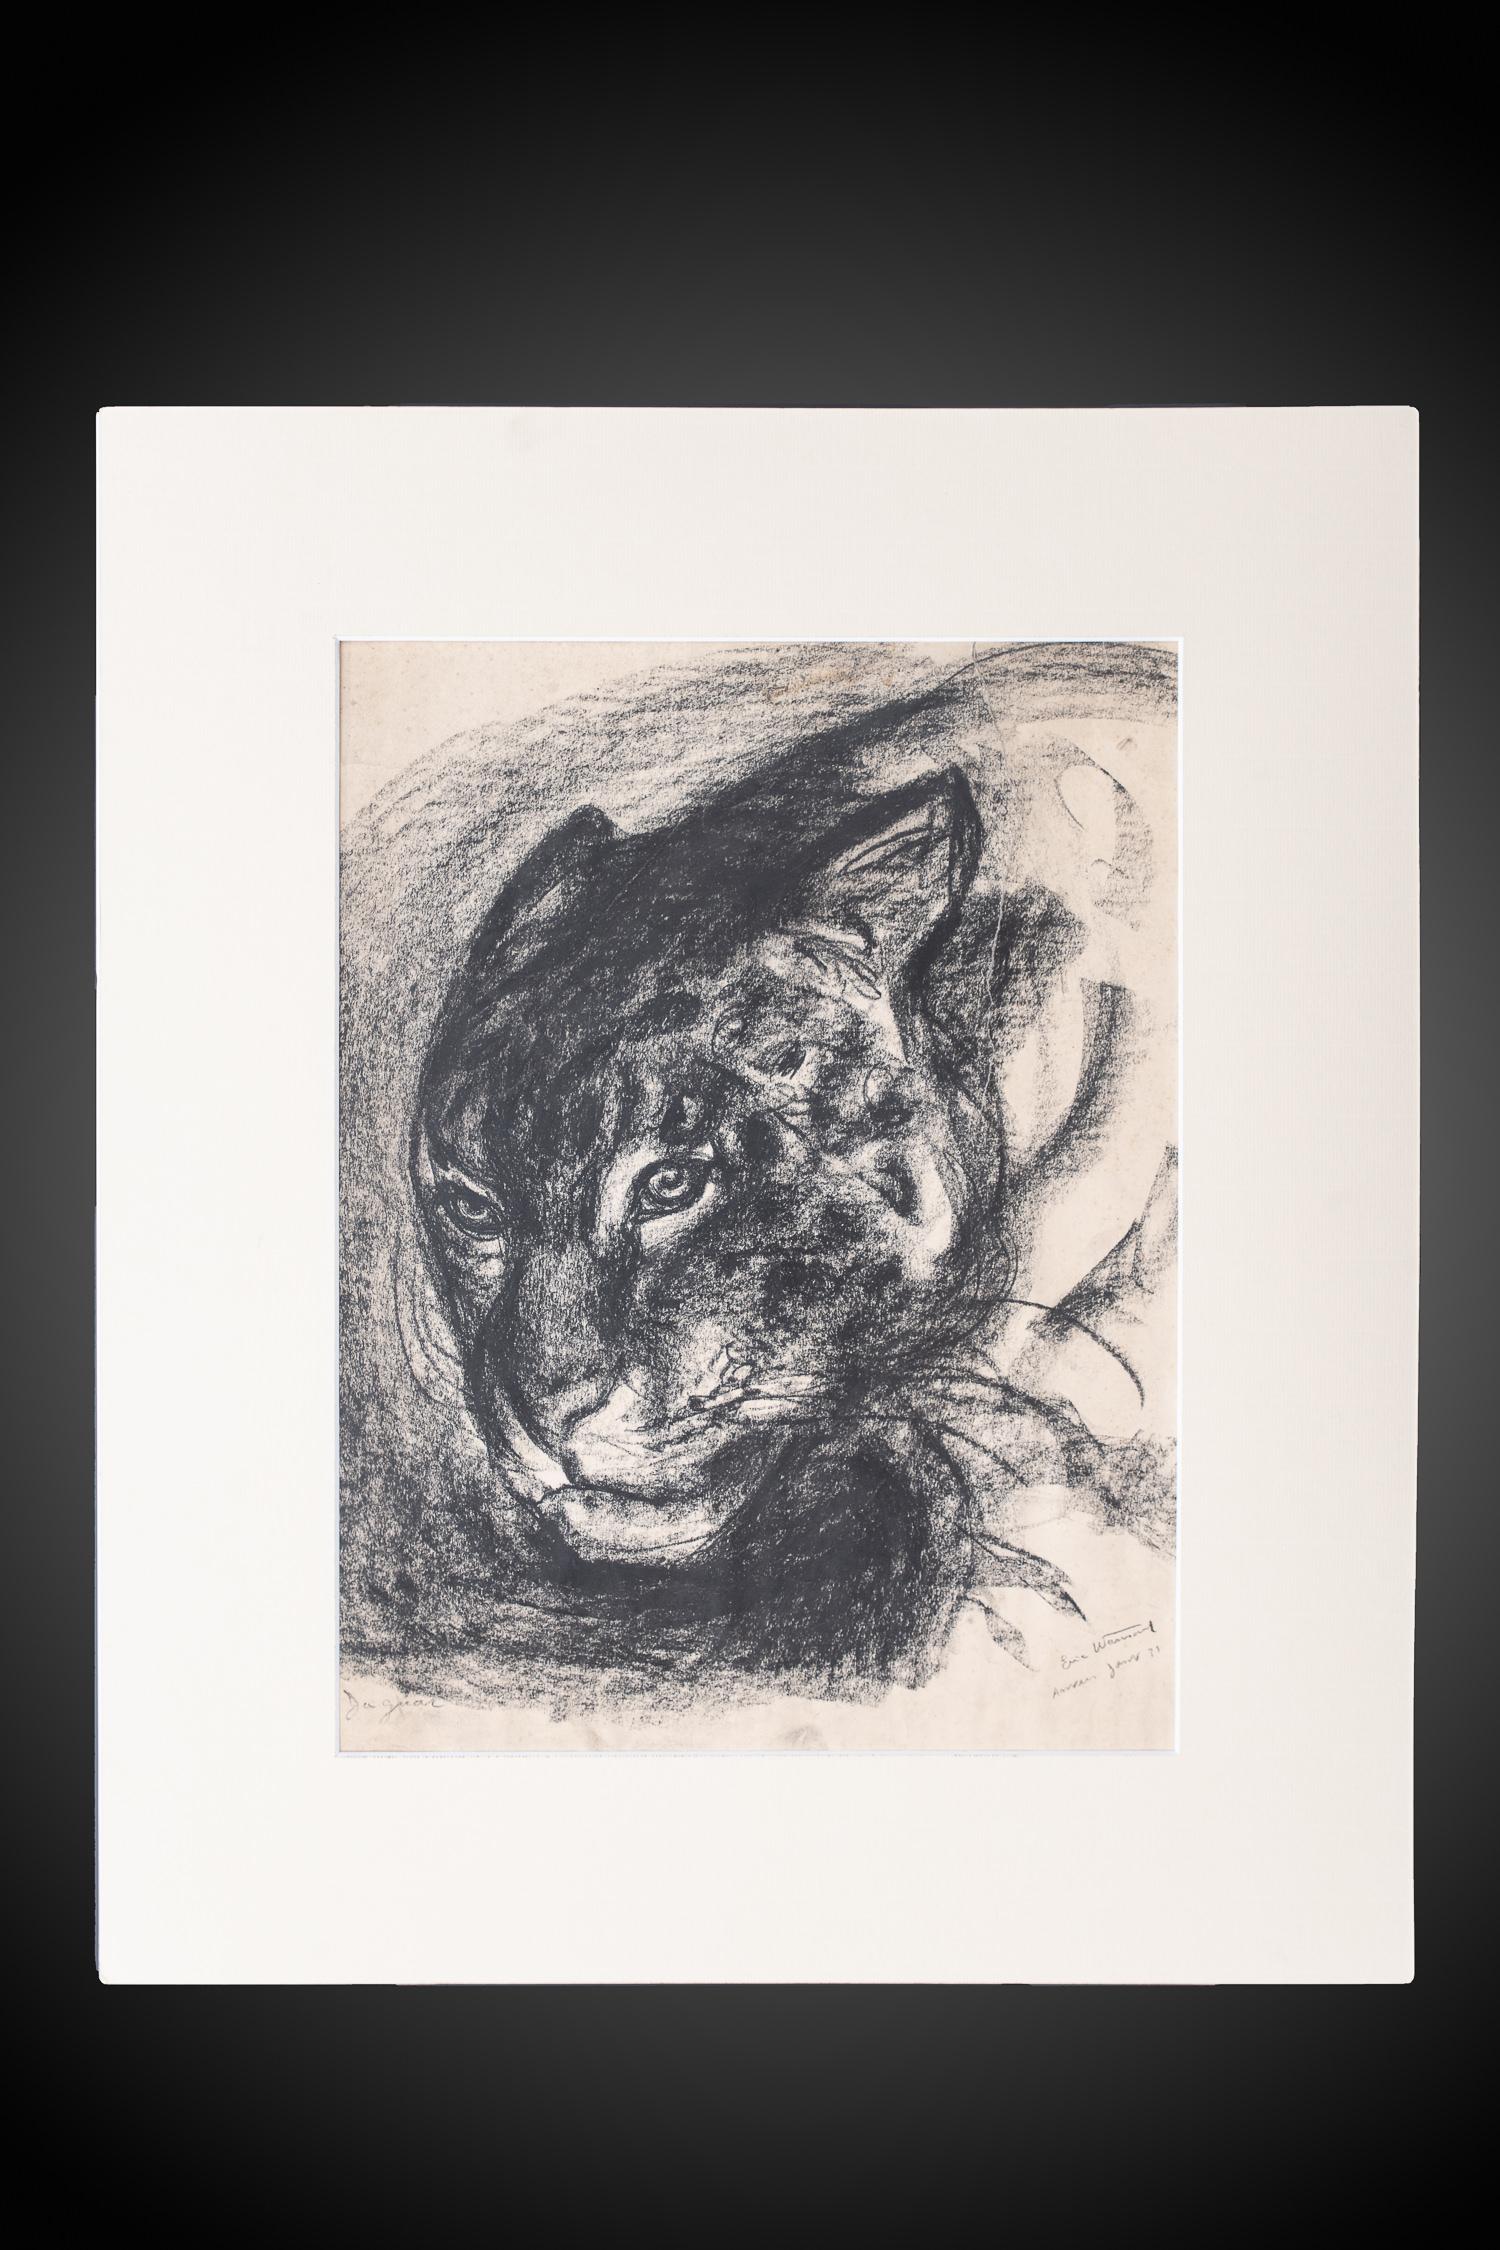 Eric Wansart (Ukkel, 1899 - Elsene, 1976), Drawing of a Panther, Charcoal, Signed and Dated.